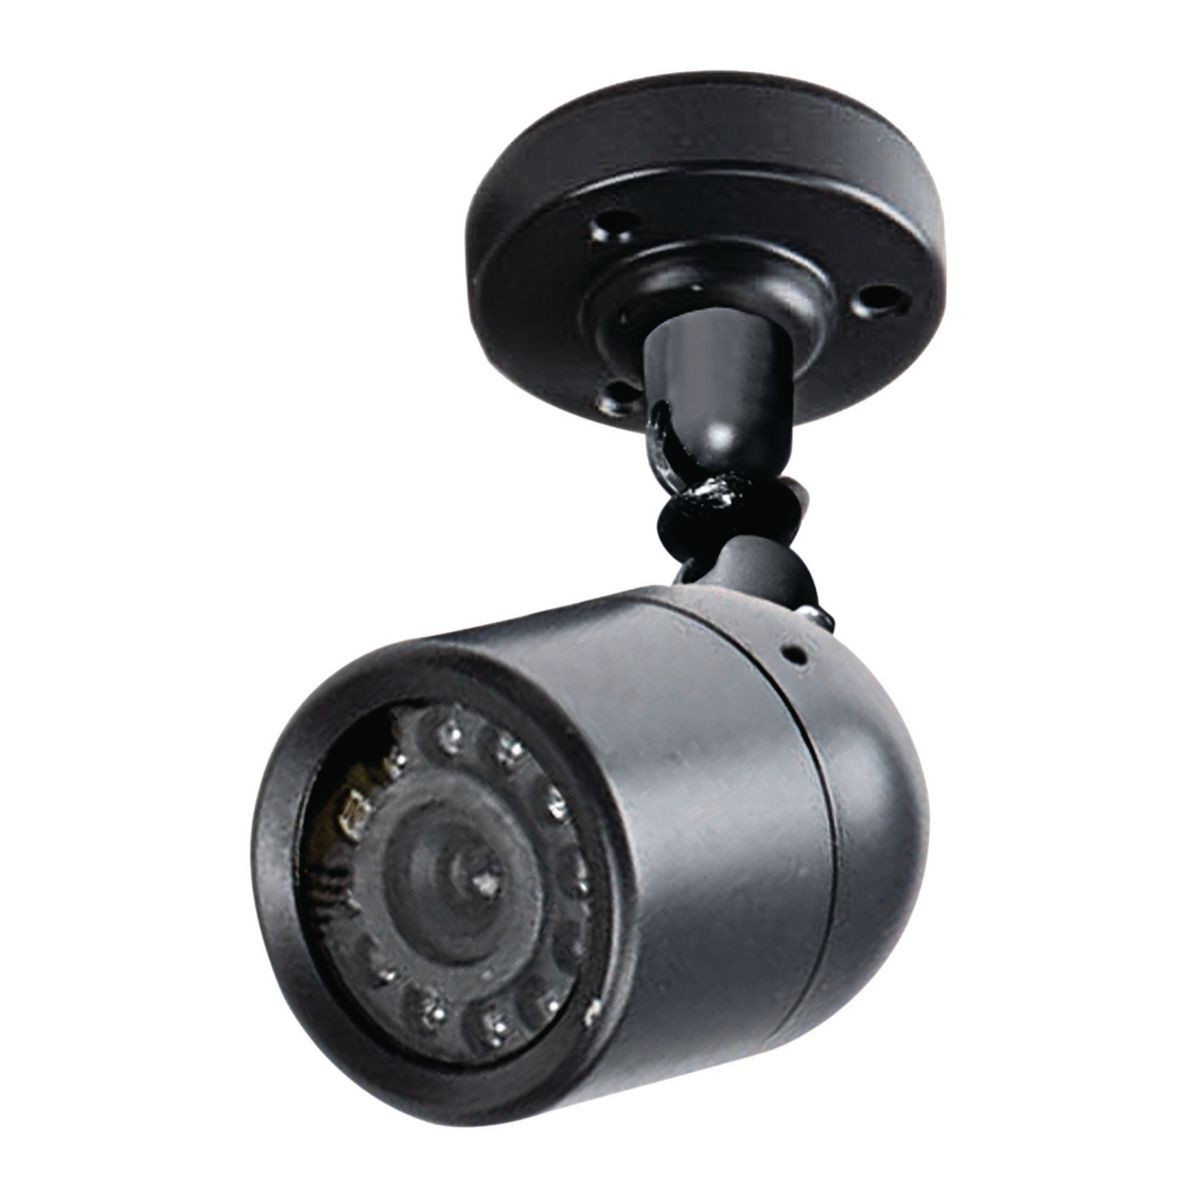 bunker hill color security camera system with night vision